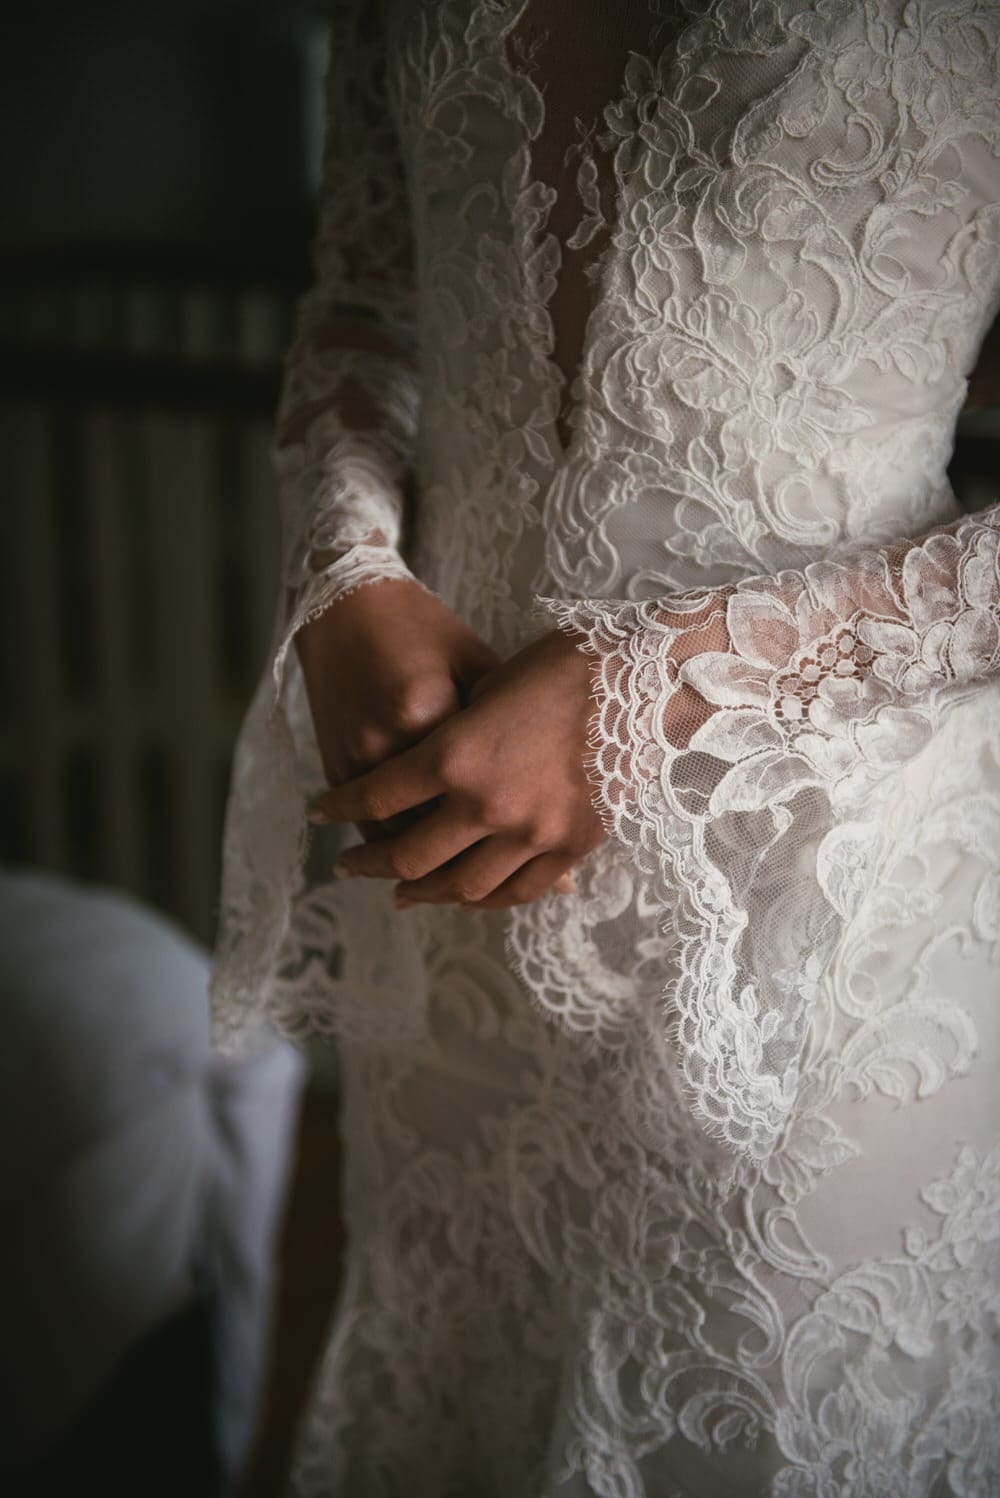 The bride's delicate lace sleeves and intricate back detail of her gown during their Northern Ireland elopement.